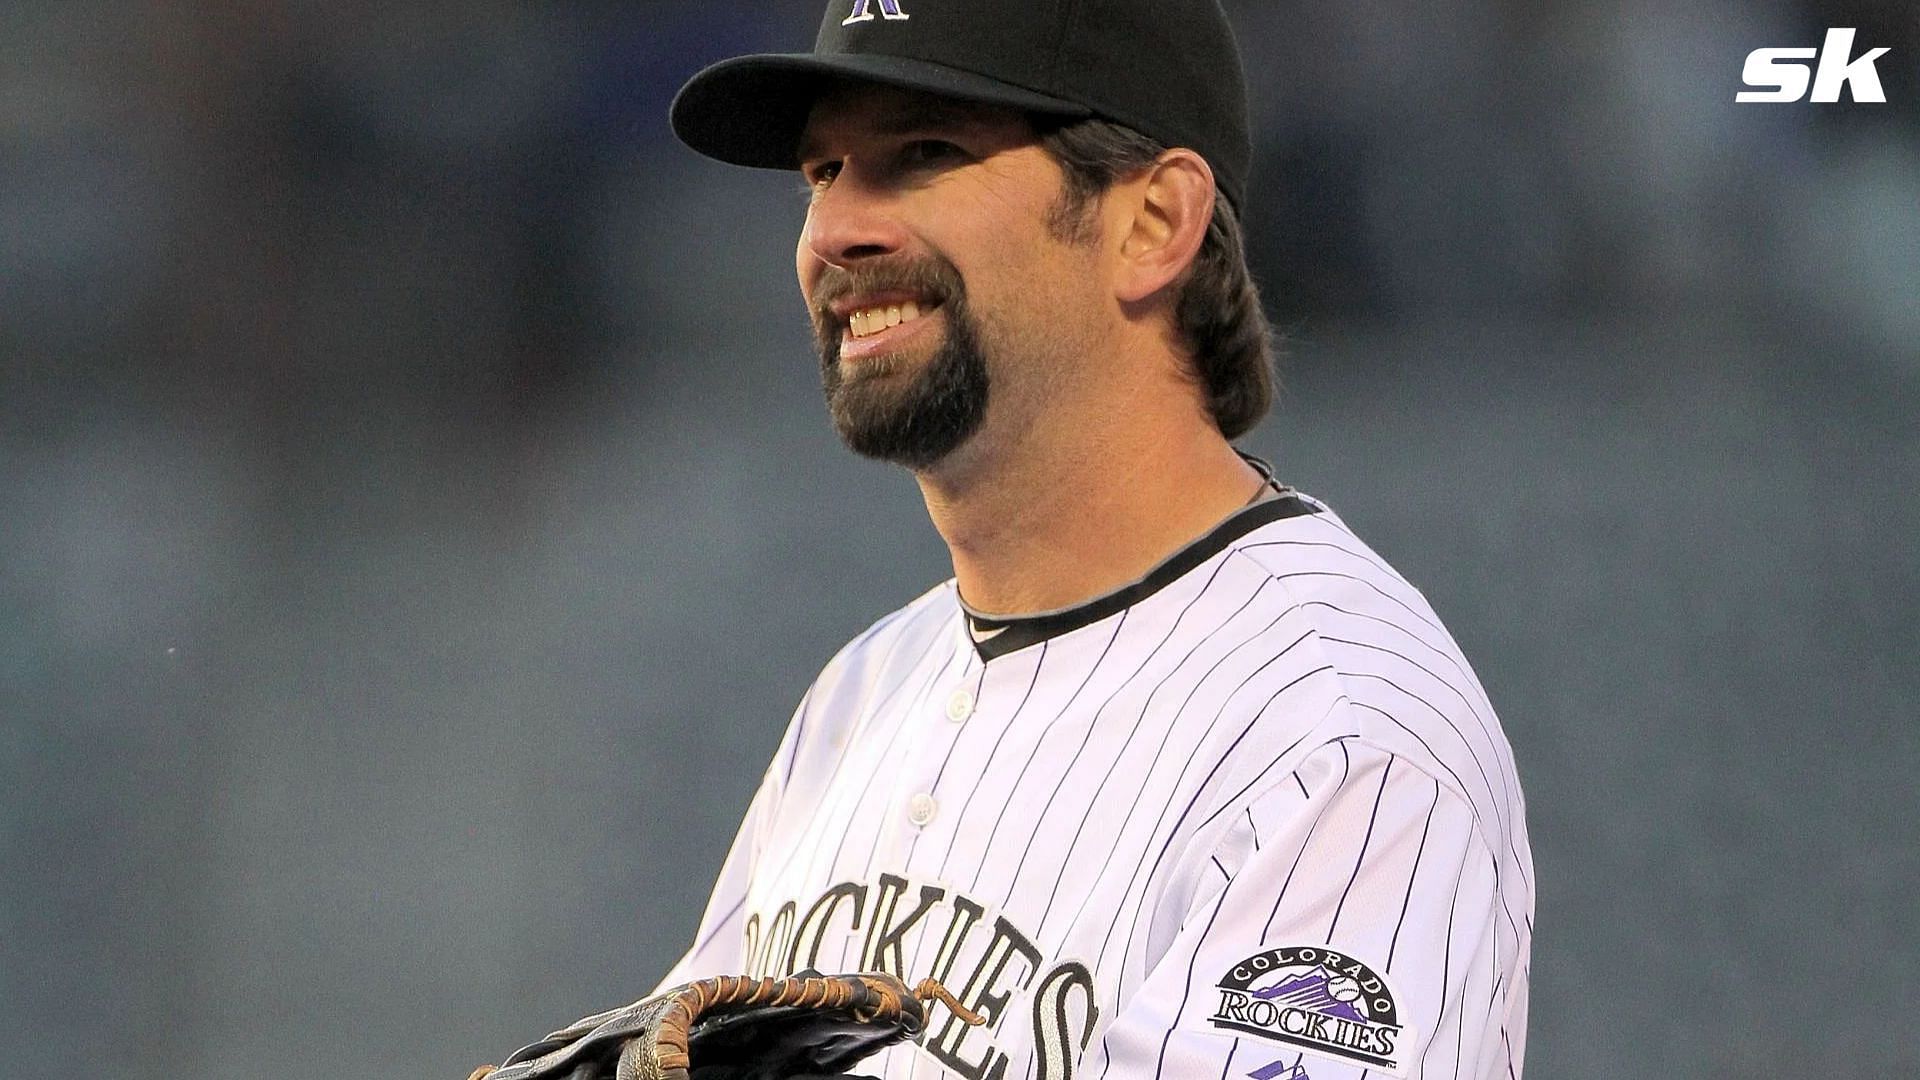 Todd Helton to be inducted into the National College Baseball Hall